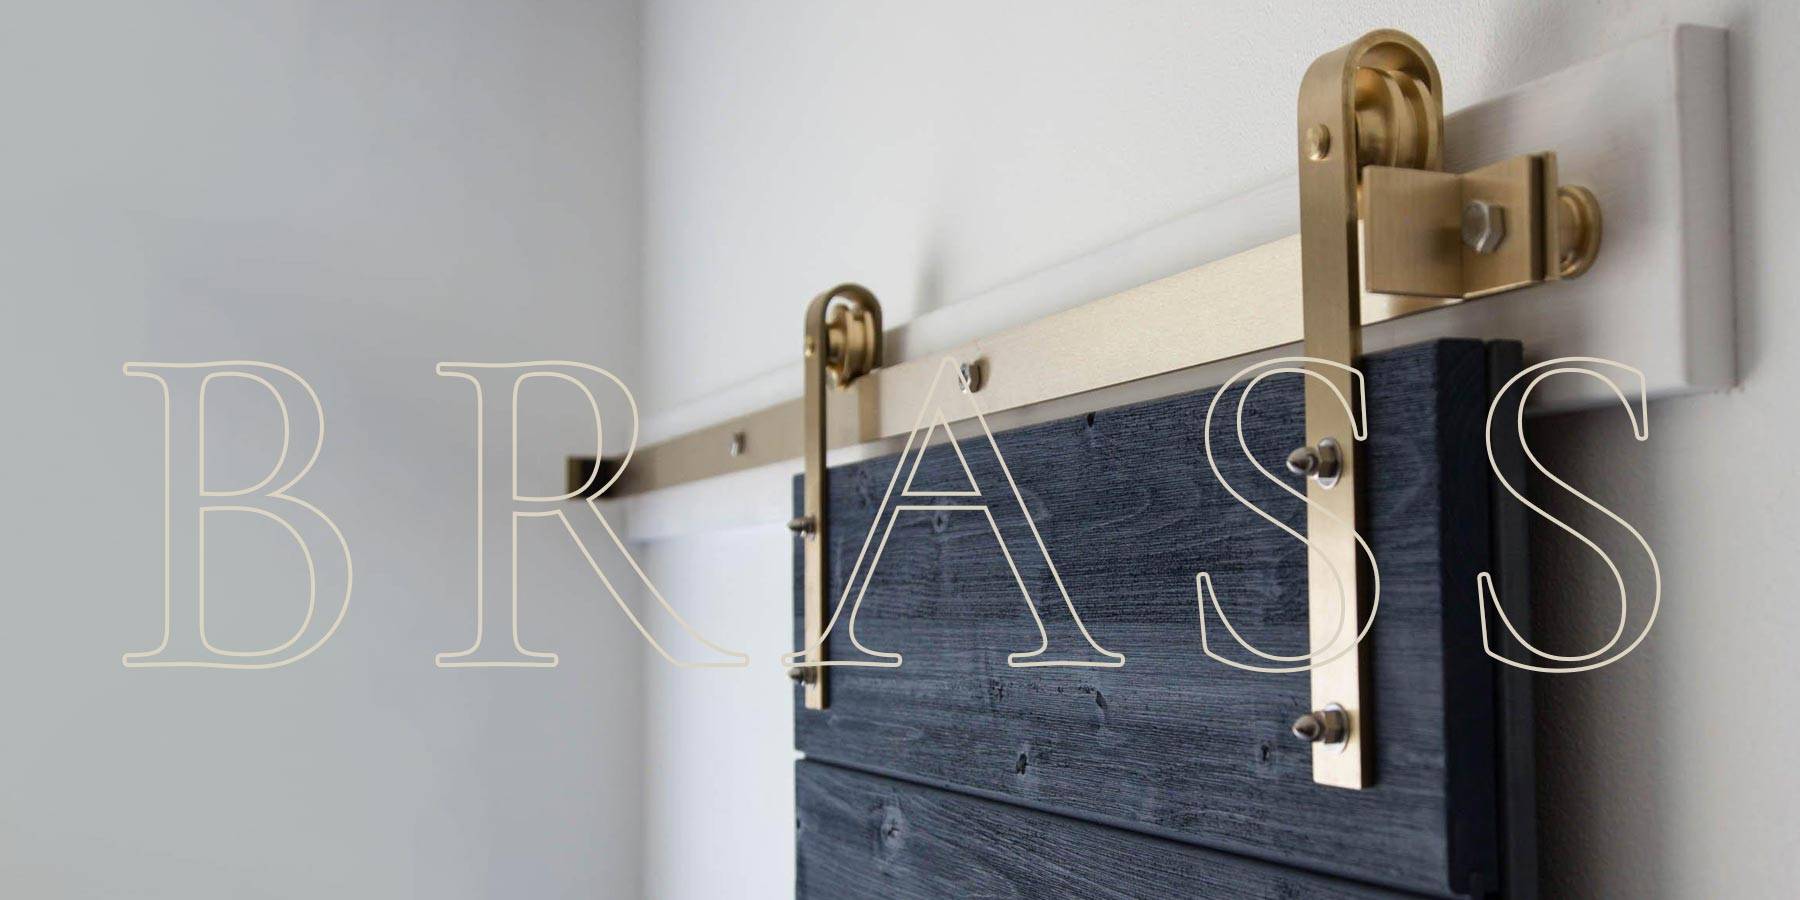 Classic Flat Track Barn Door Hardware installed on a blue barn door. The word BRASS is writtern over the image.